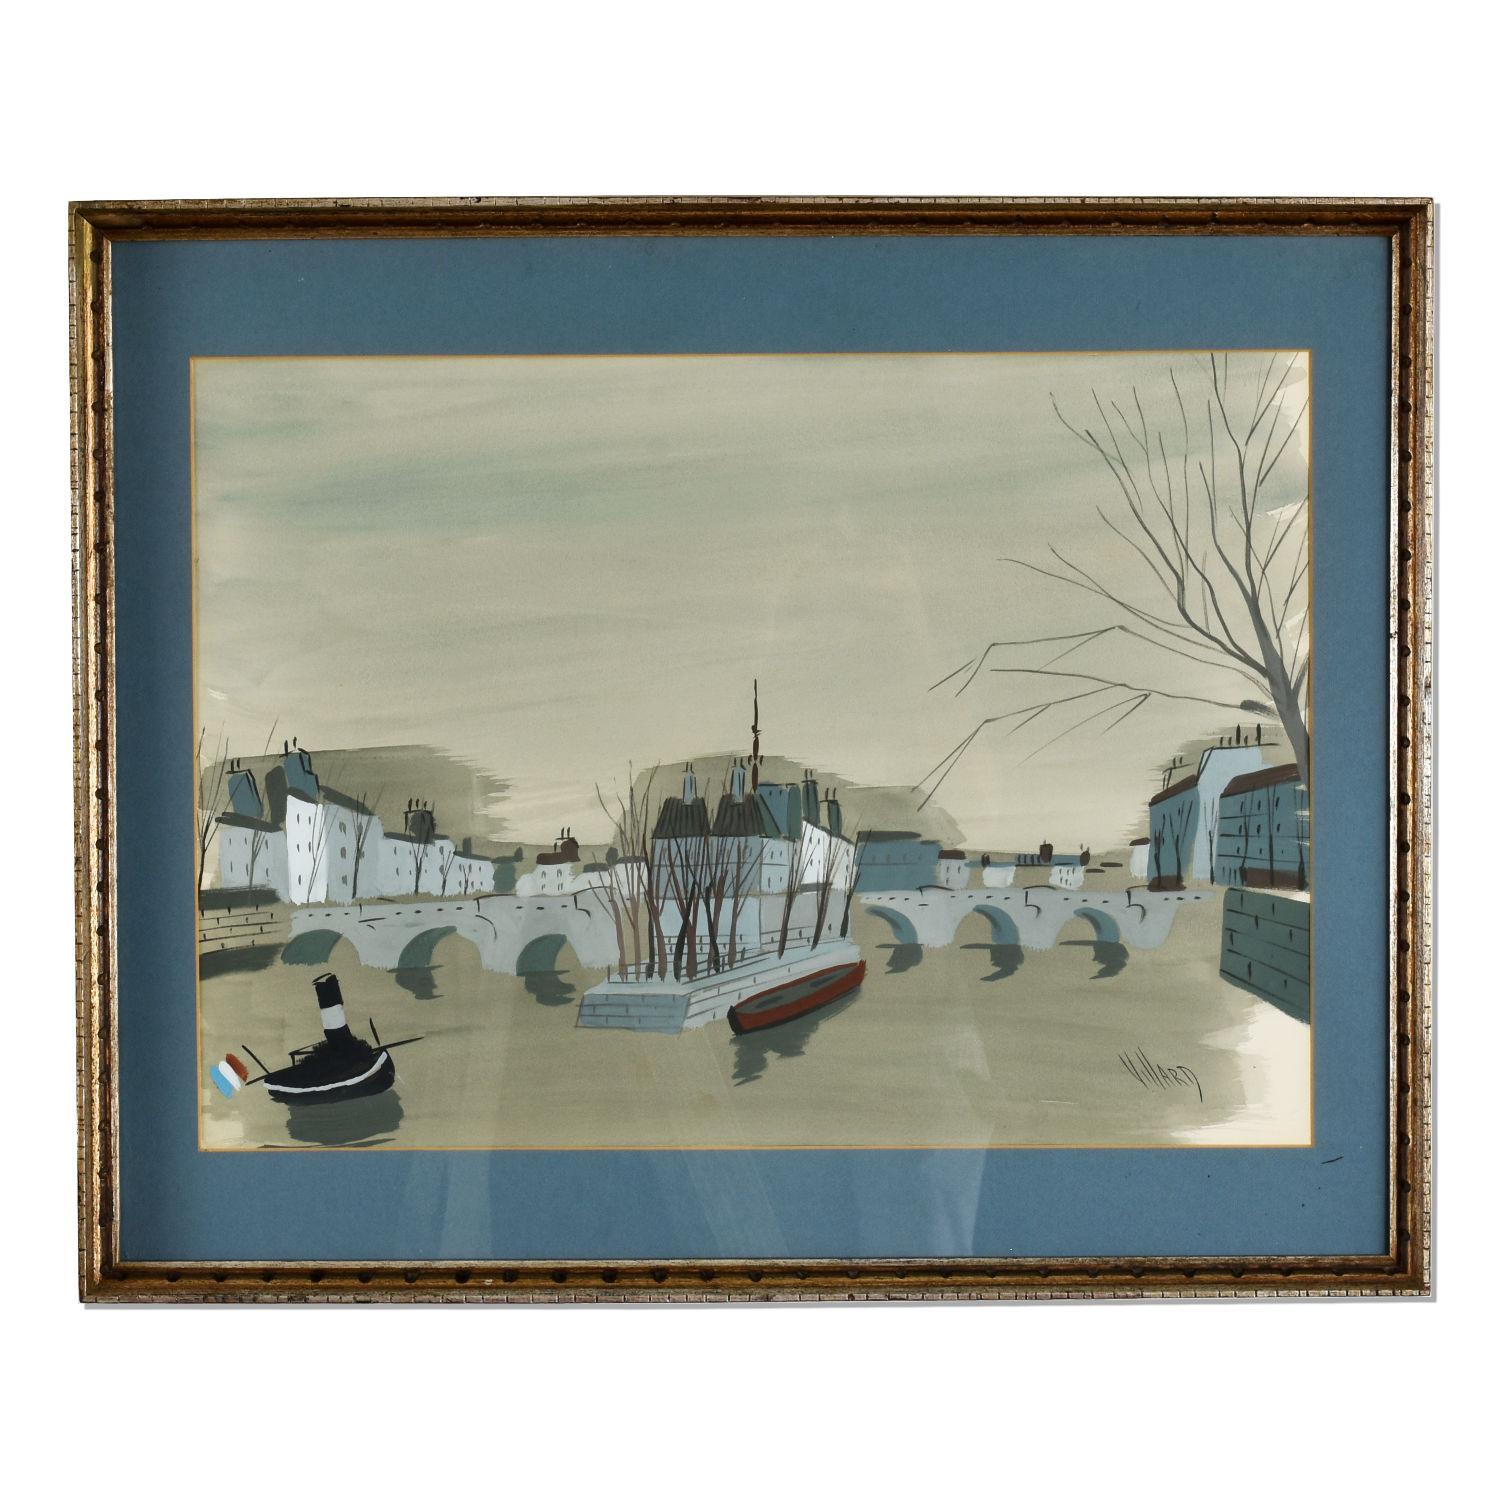 “La Pont” by celebrated French painter, Antoine Villard. The title simply means “the bridge.” Likely a scene painted from one of the many bridges spanning the Rhône and Saône rivers running through Lyon, France. Villard studied architecture and